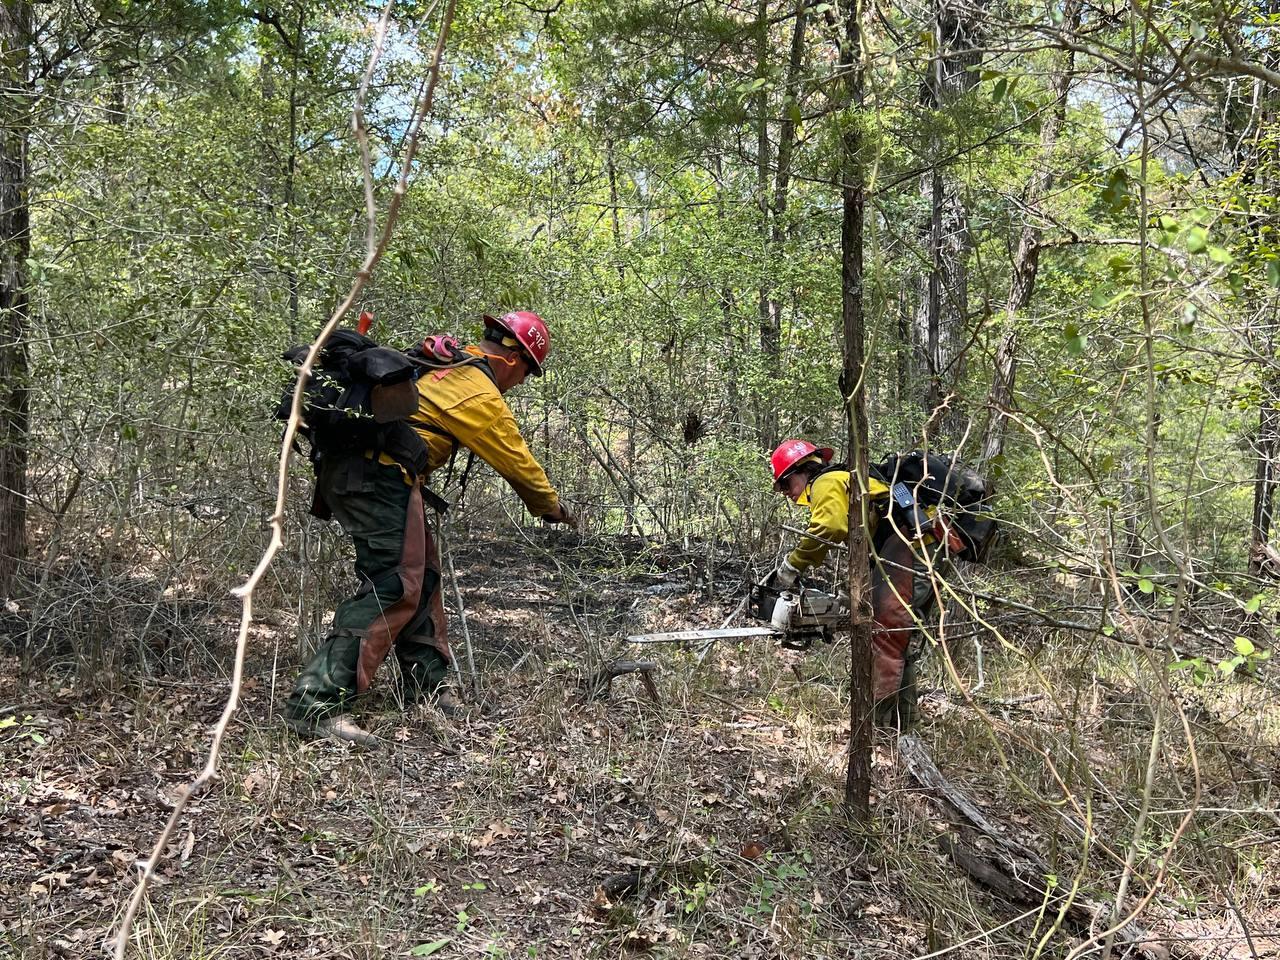 1 firefighter uses a chainsaw to cut small brush and vegetation while another fire fighter pulls the cut vegetation out of the way.